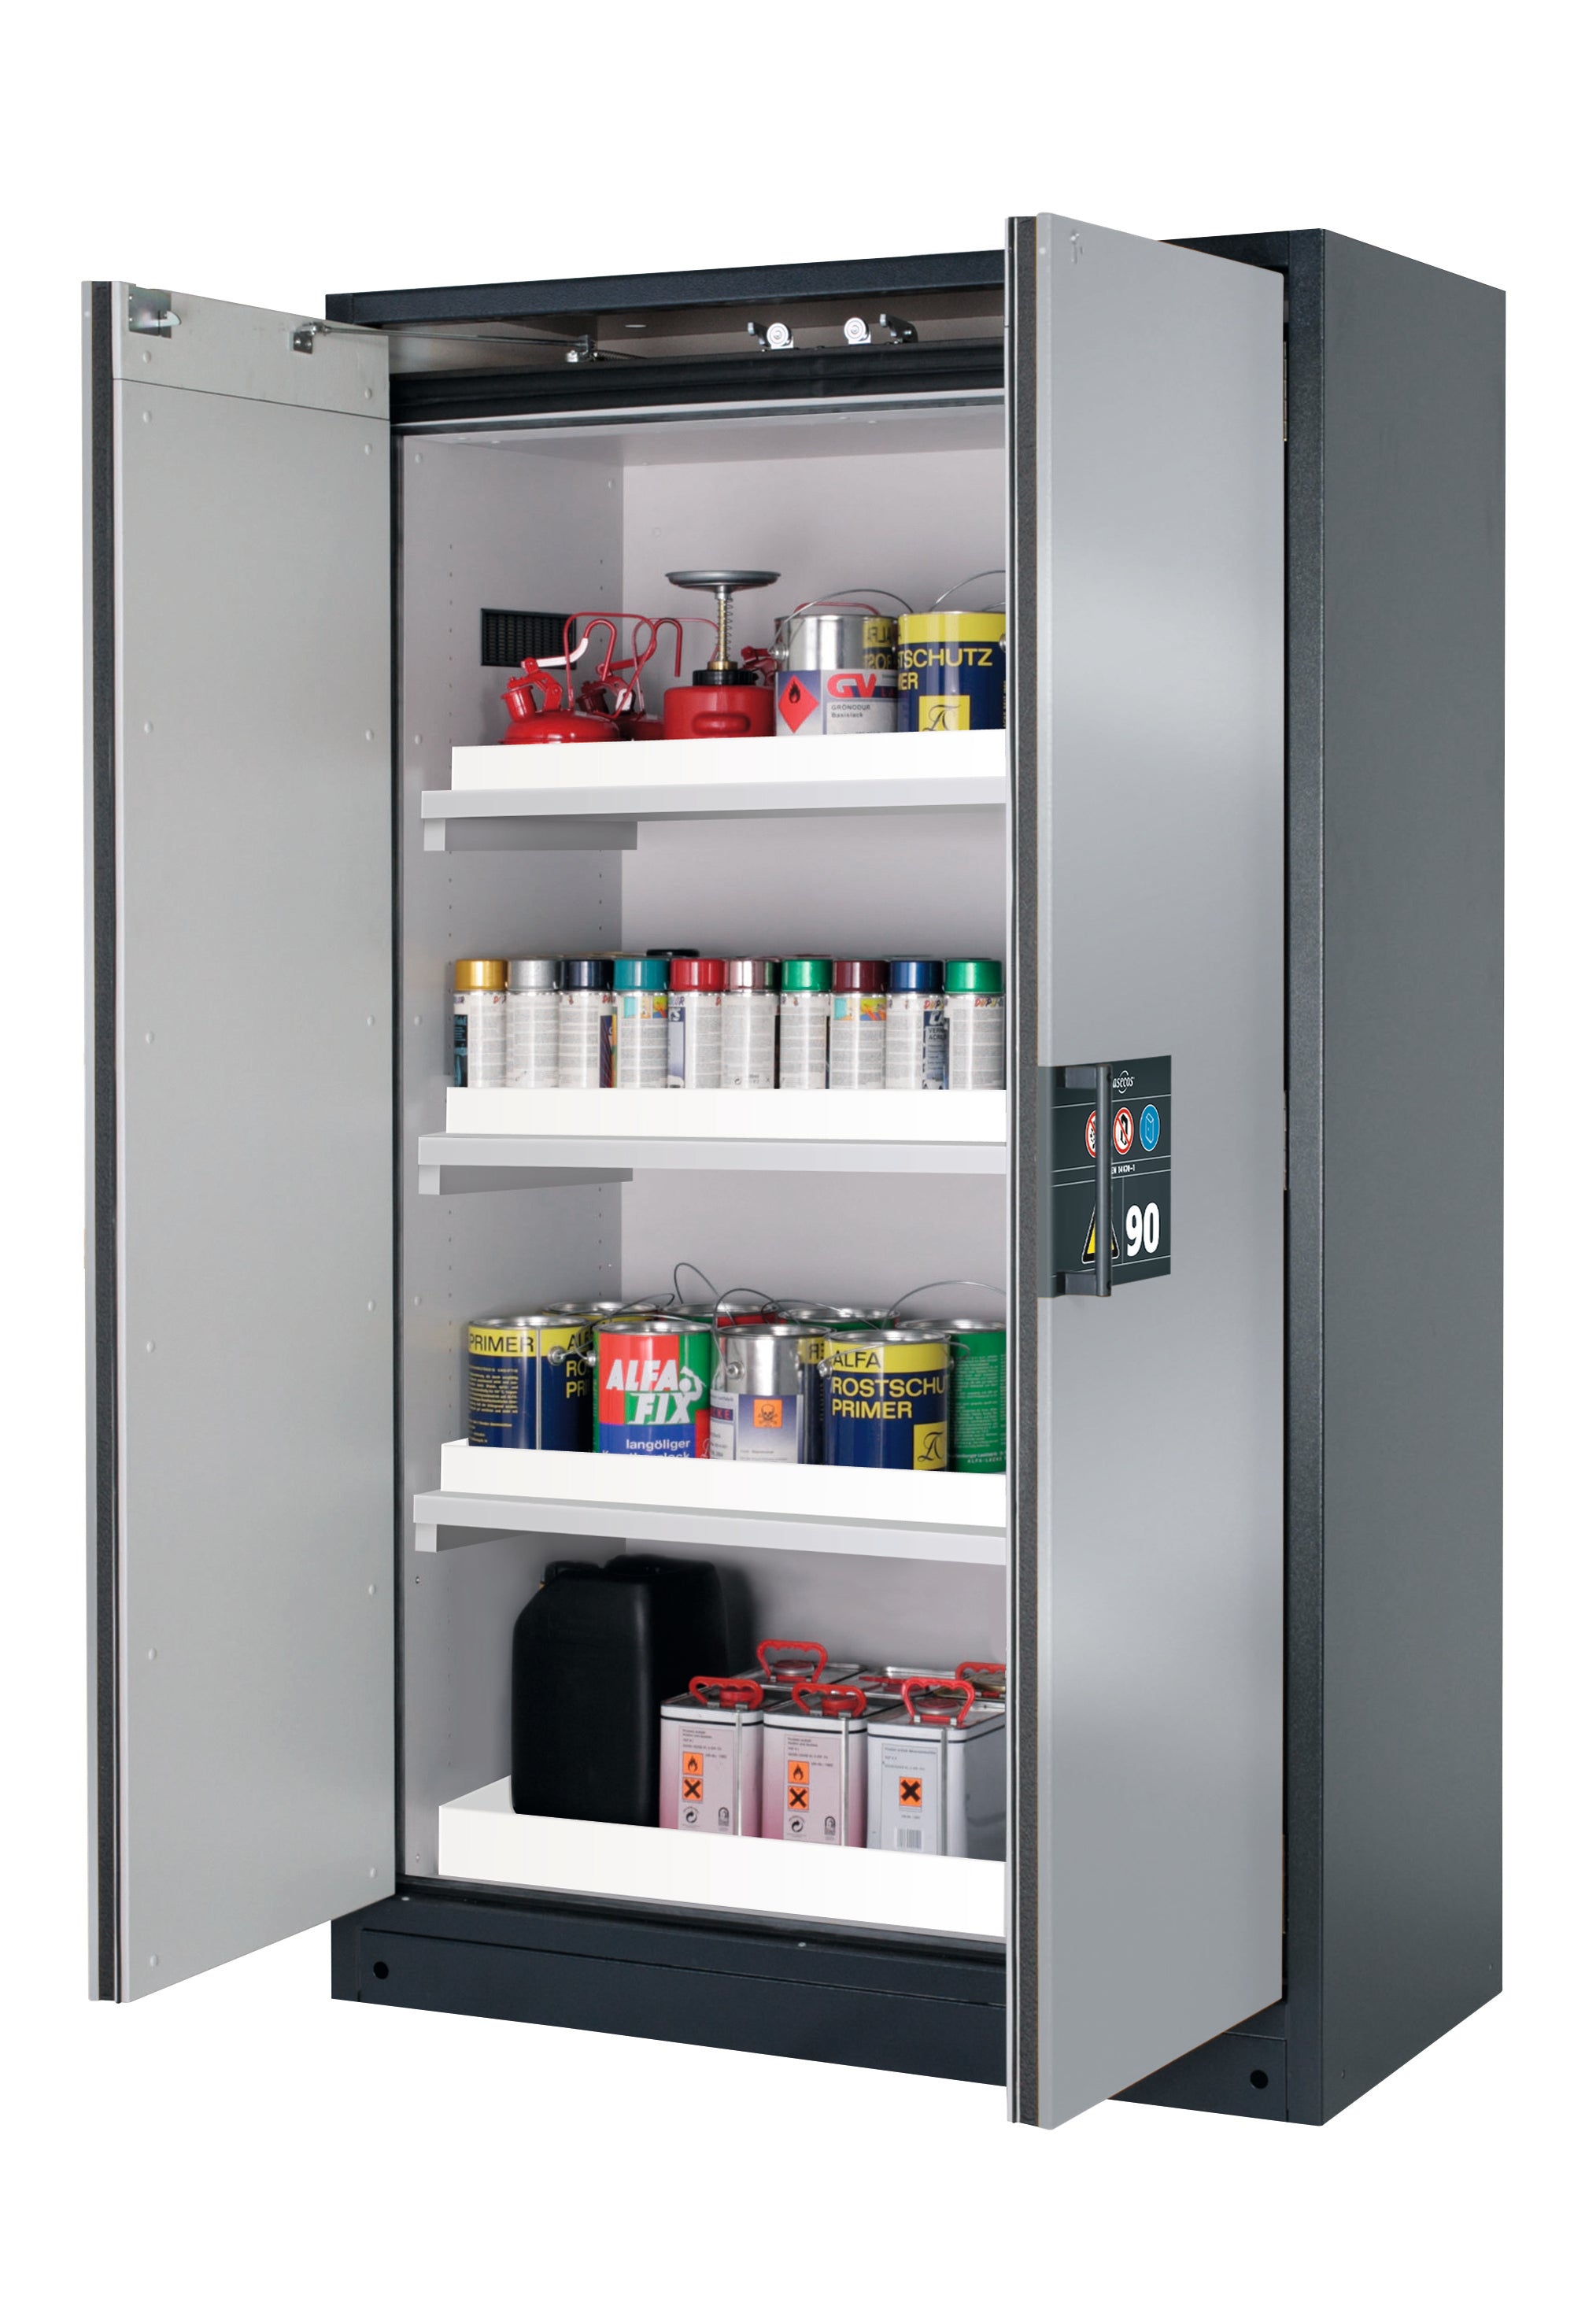 Type 90 safety storage cabinet Q-CLASSIC-90 model Q90.195.120 in asecos silver with 3x tray shelf (standard) (polypropylene),